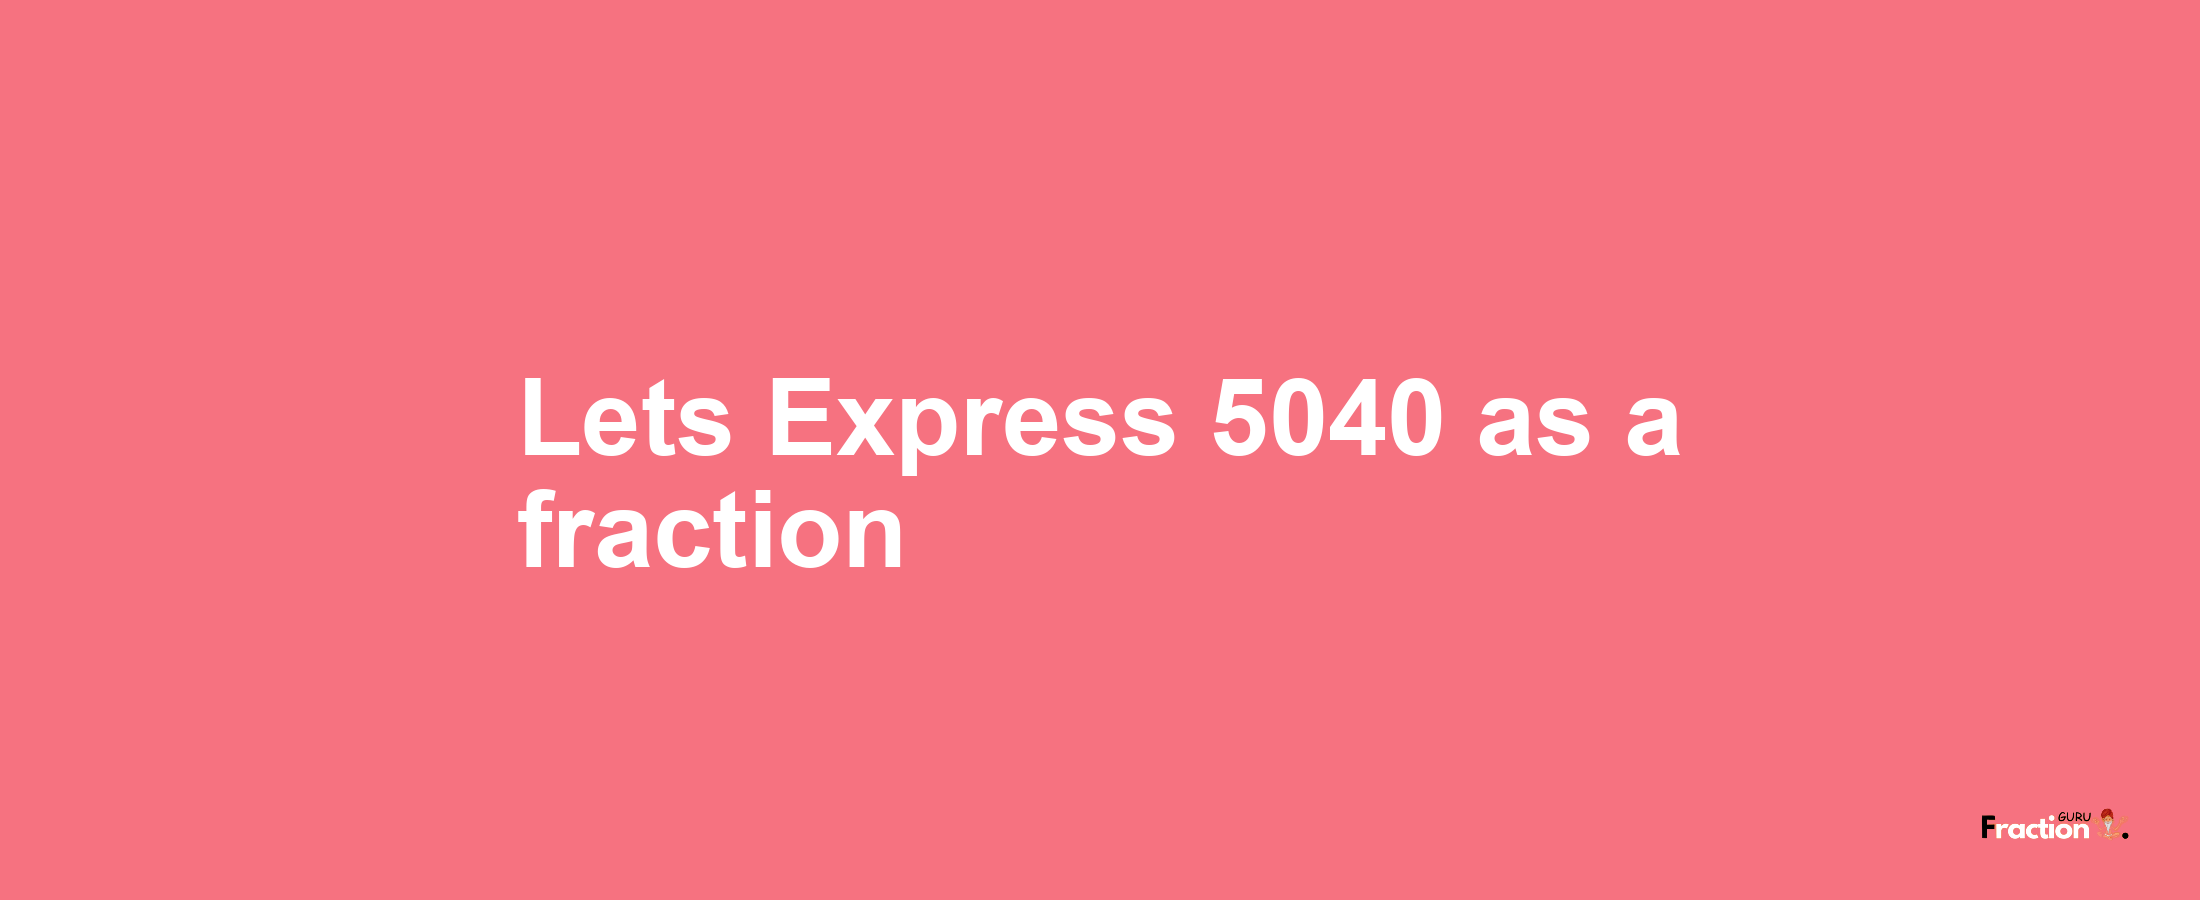 Lets Express 5040 as afraction